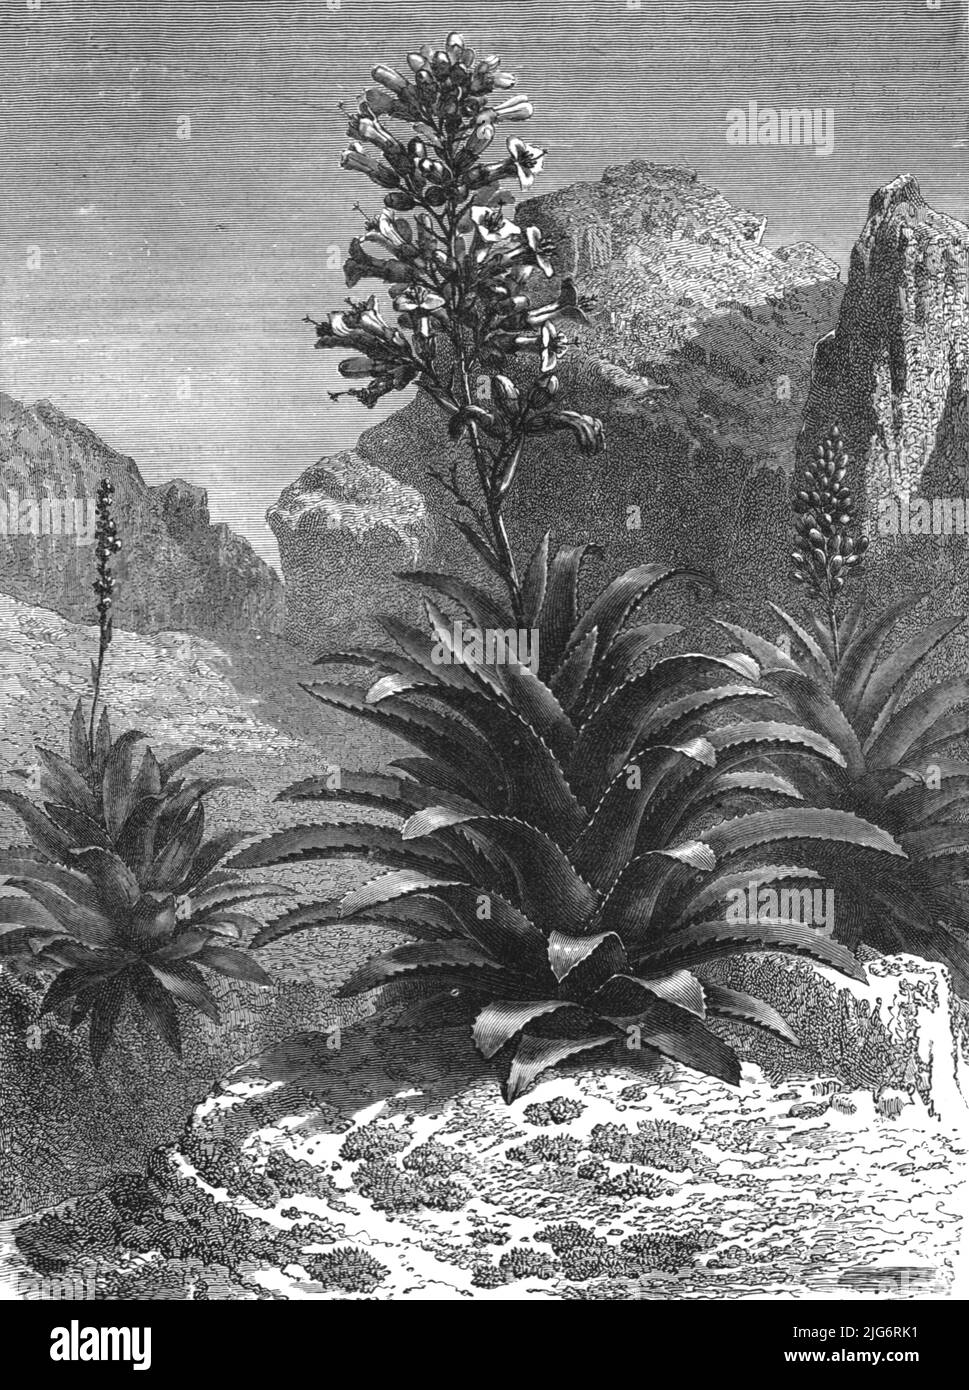 'Agaves in Bloom; A zigzag journey through Mexico', 1875.  From, 'Illustrated Travels' by H.W. Bates. [Cassell, Petter, and Galpin, c1880, London] Stock Photo